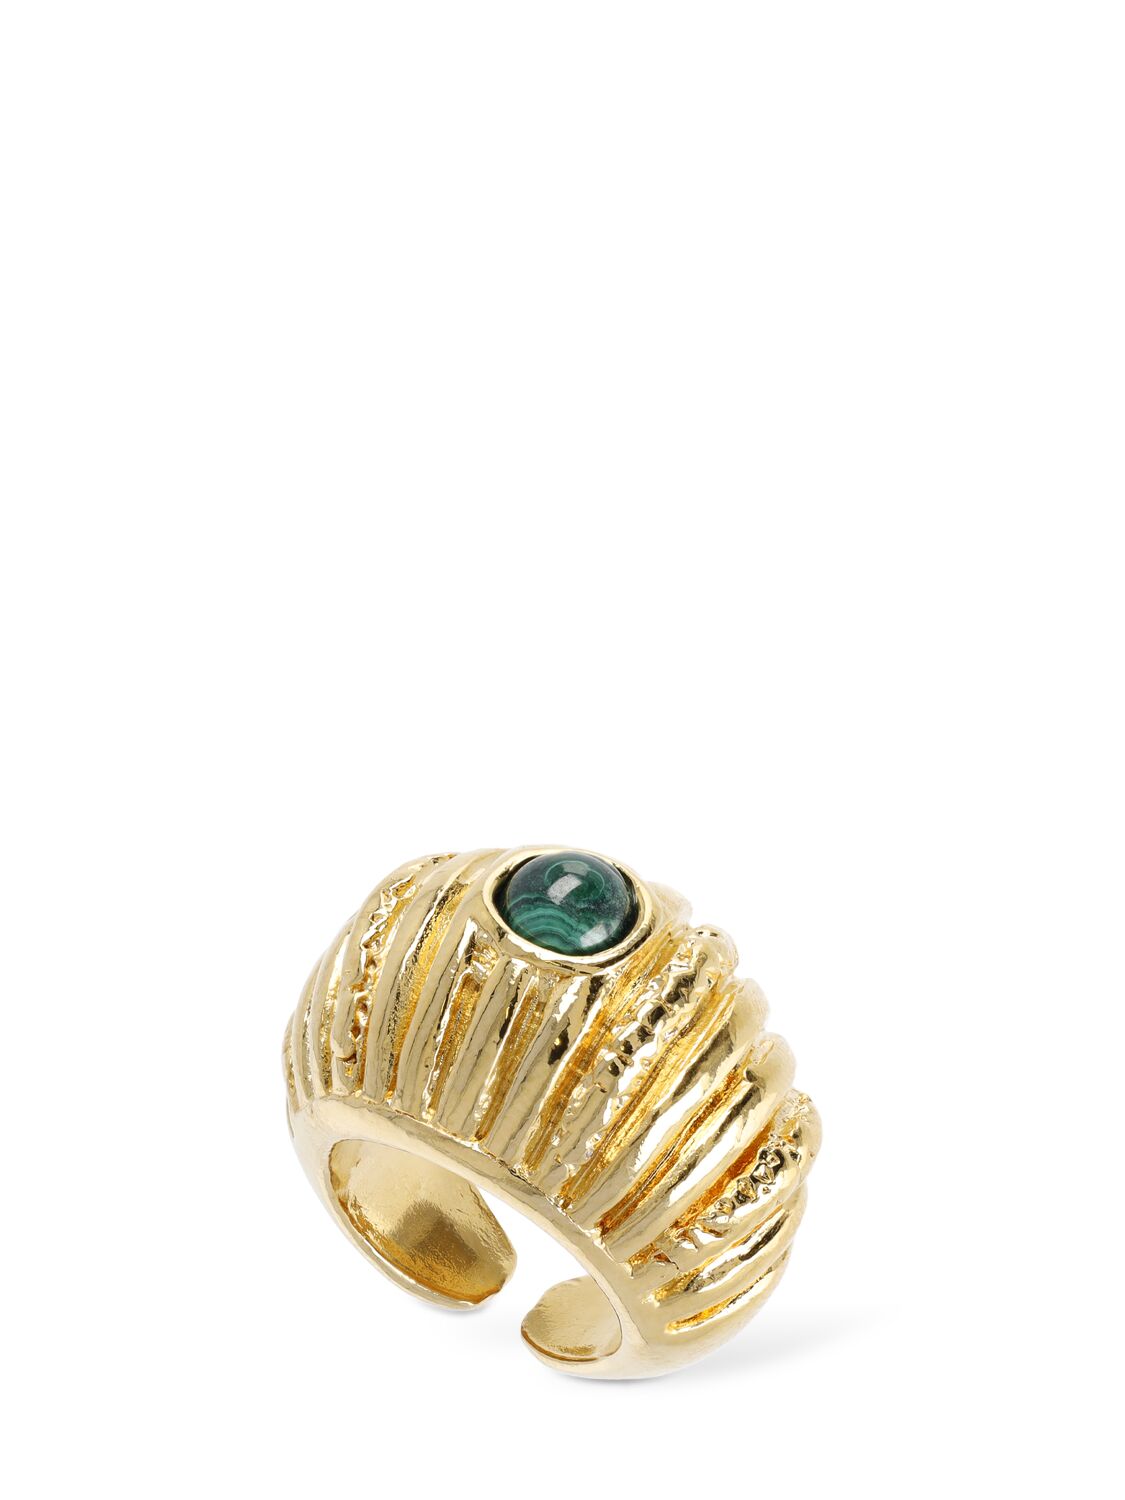 Paola Sighinolfi Small Reef Malachite Thick Ring In Gold,green